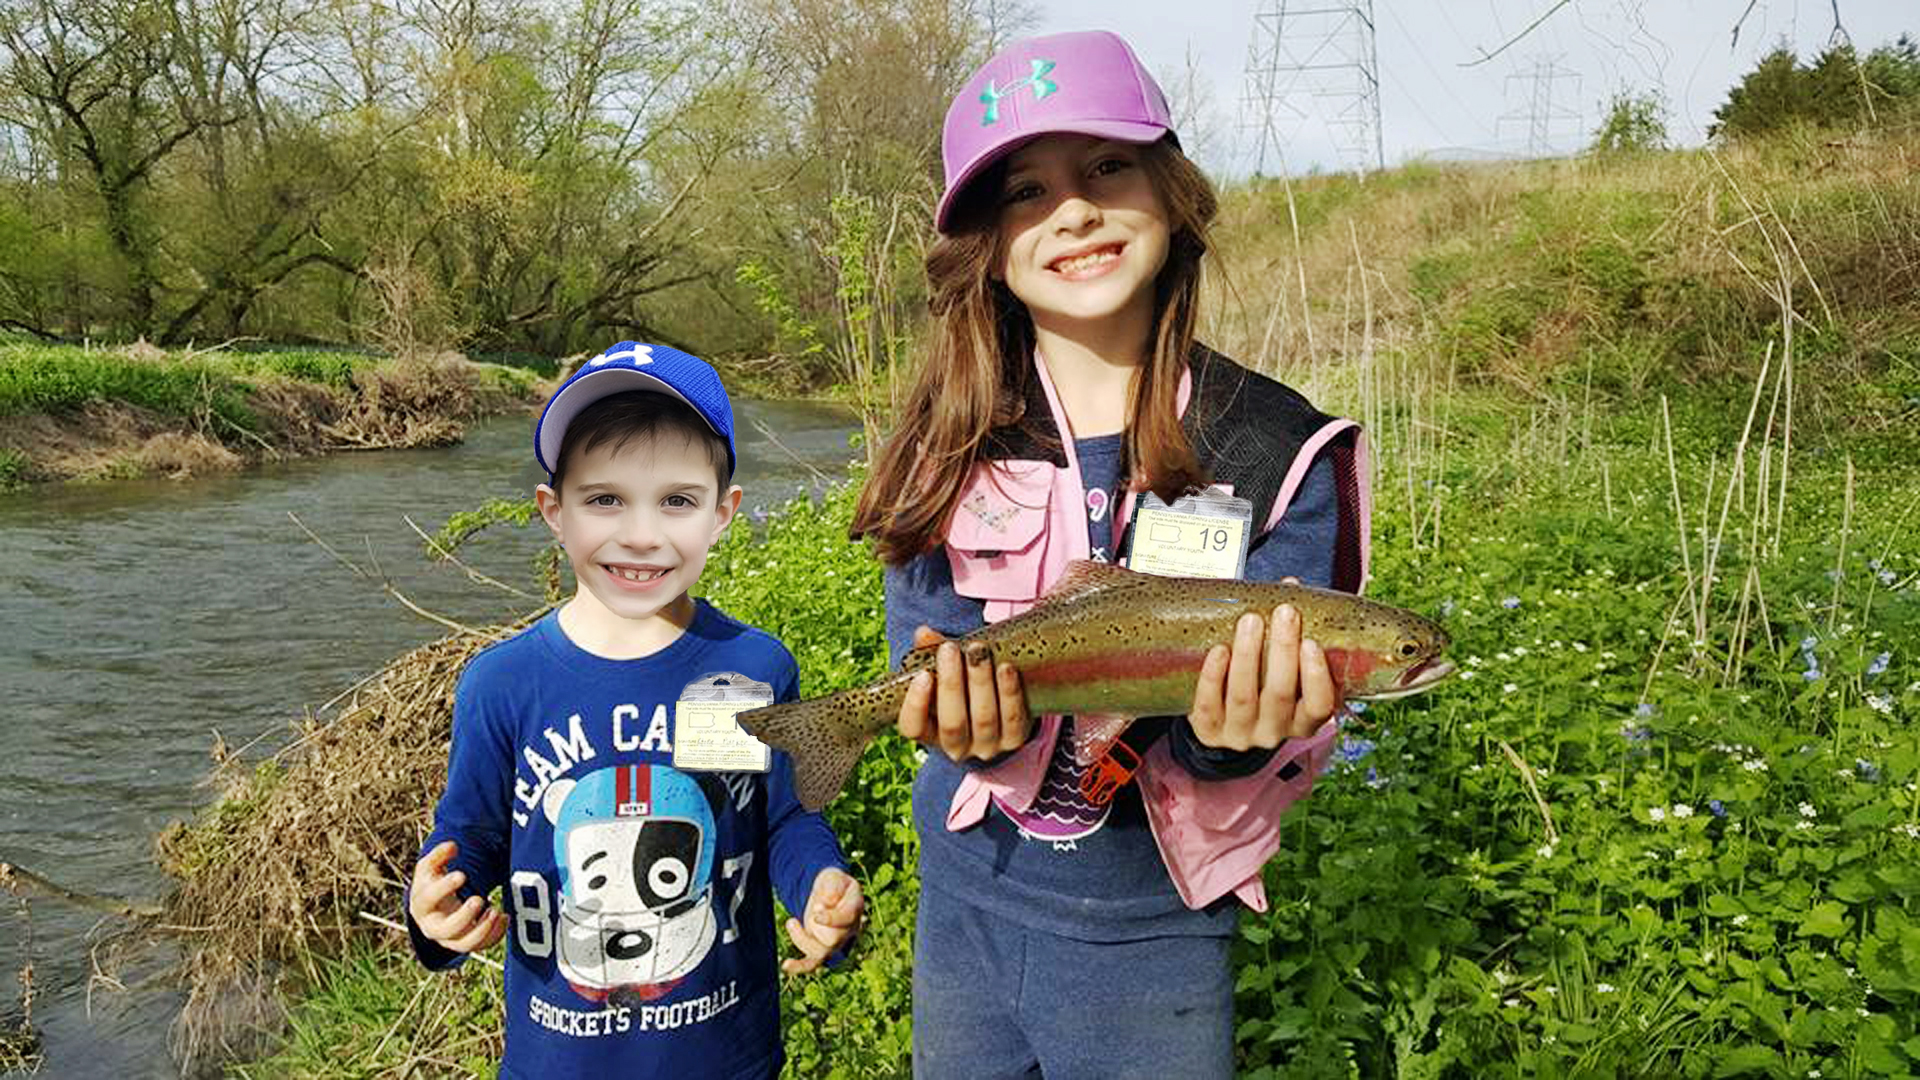 Youth Only Trout Area stocked by Hopewell Fish and Game